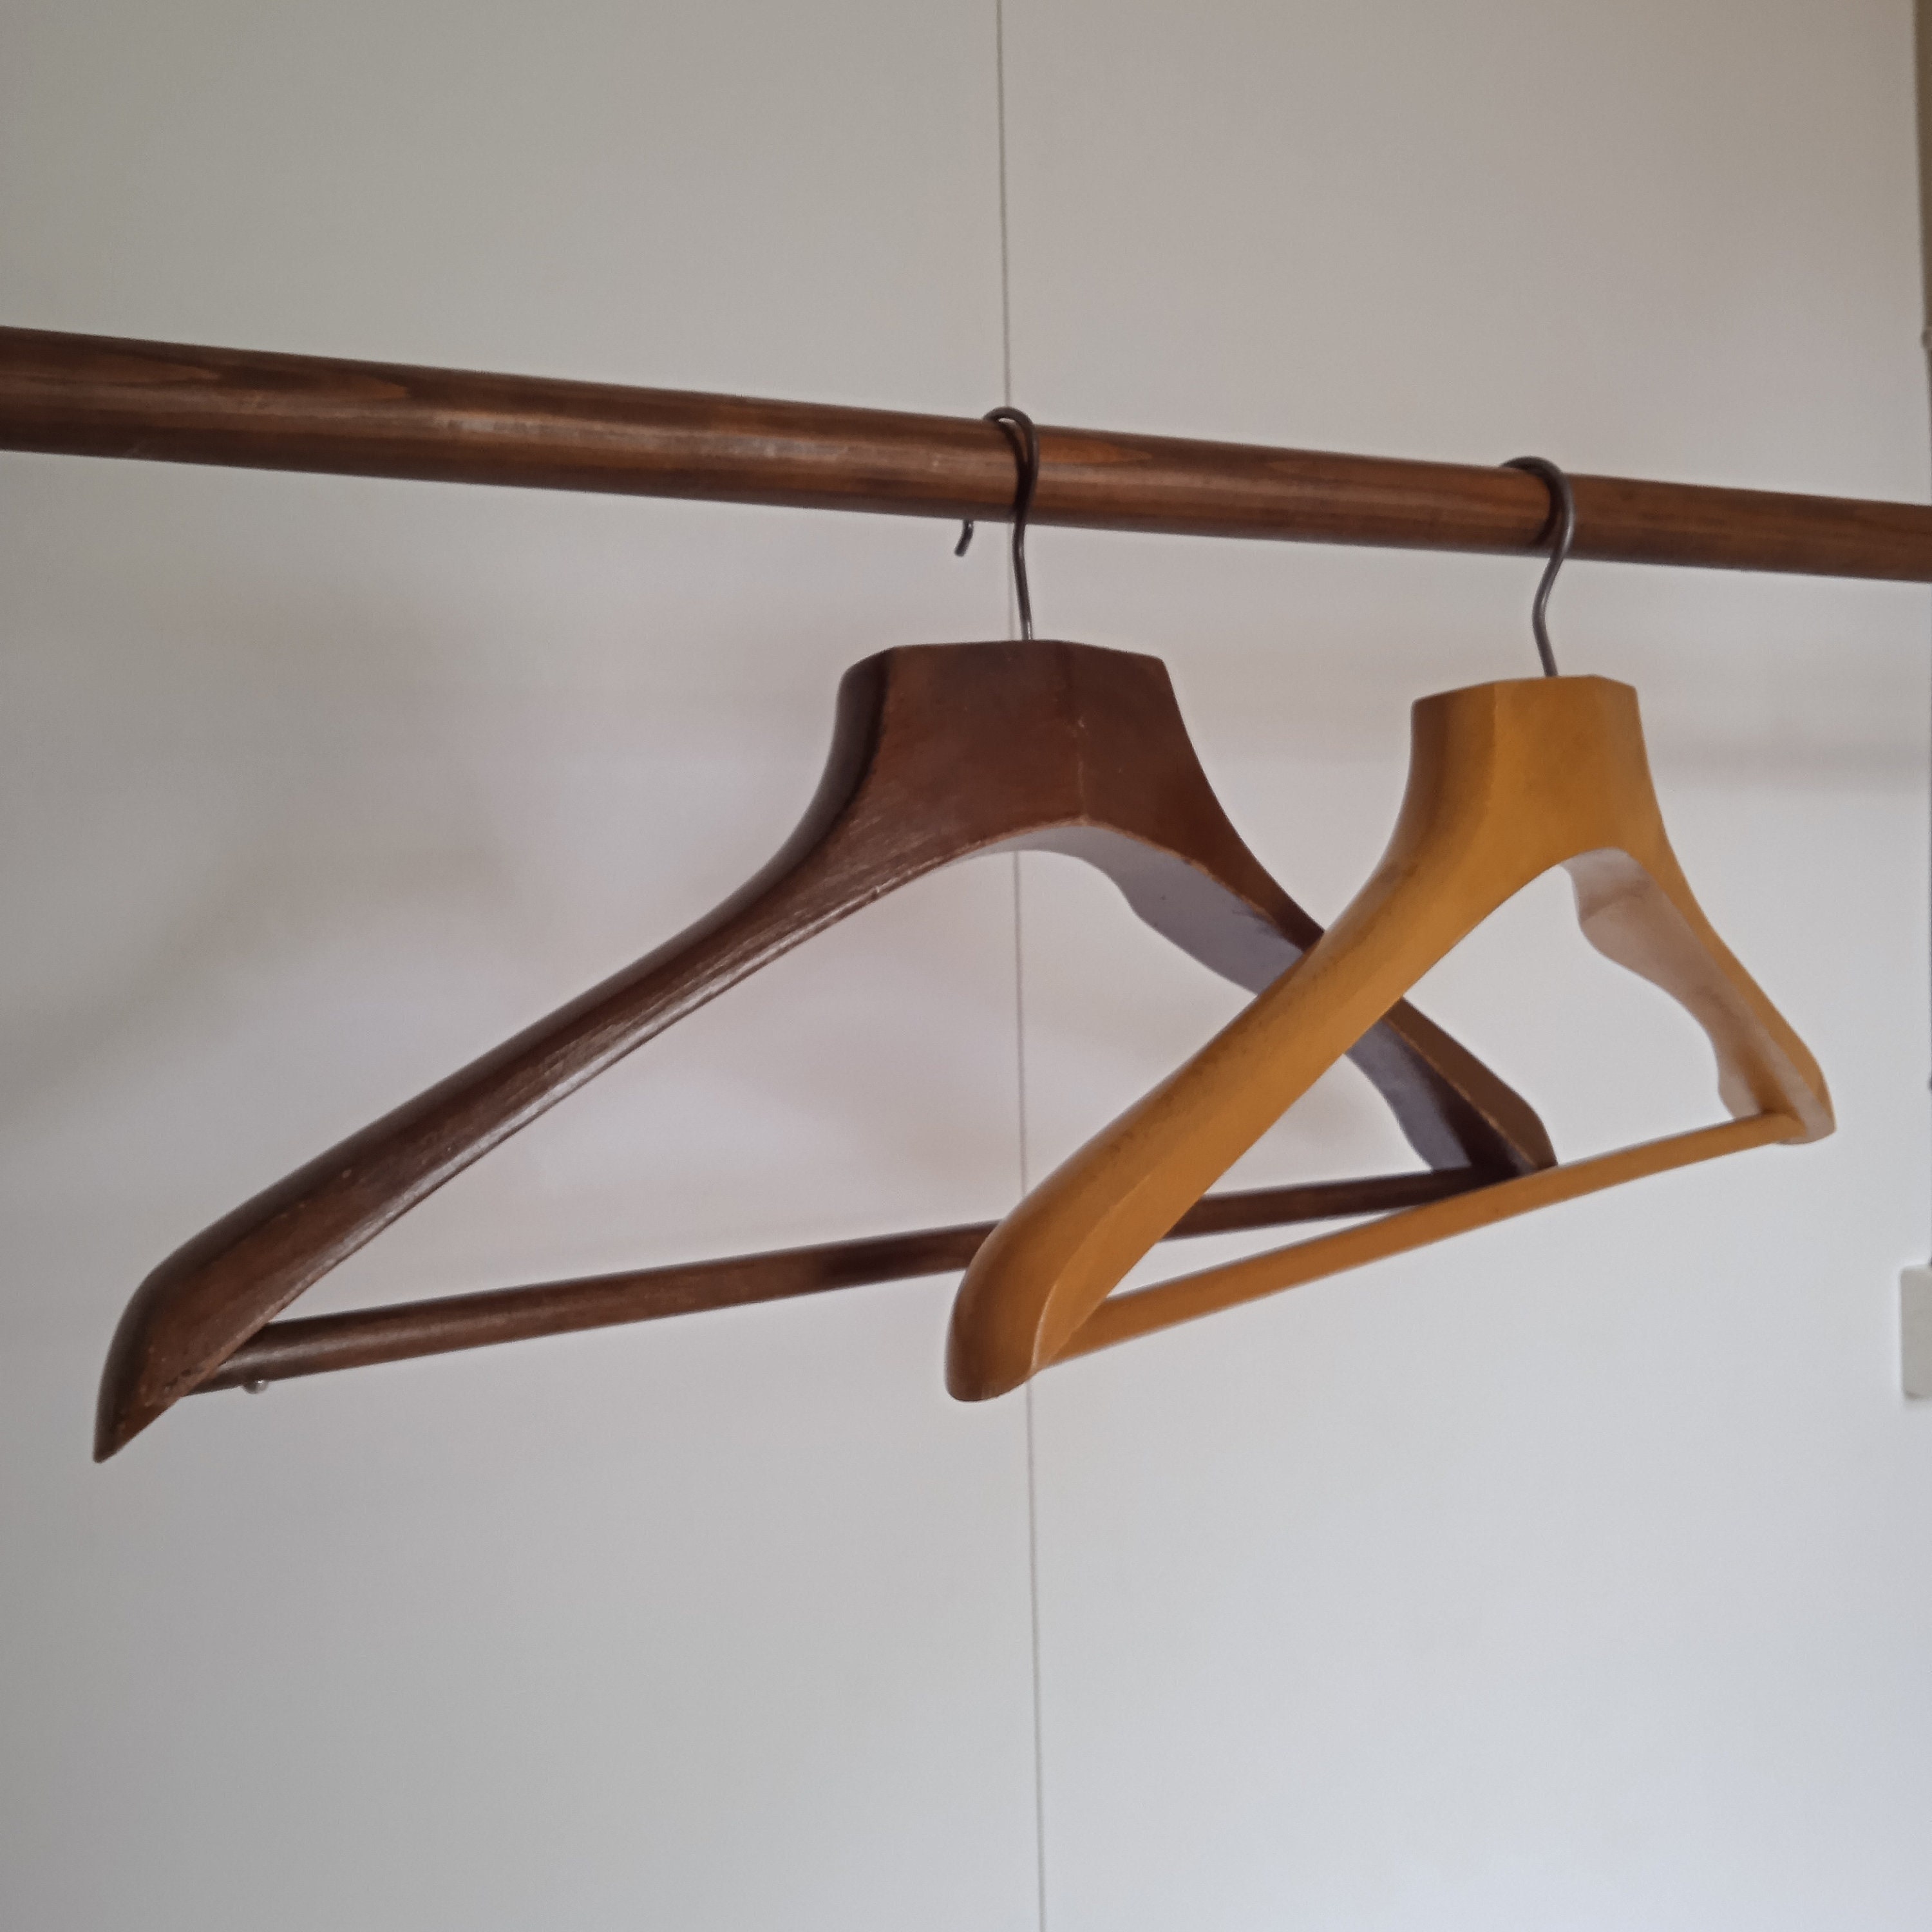 Wooden Top Hanger with Walnut Finish Space Saving 17 inch Flat Hangers with Brass Swivel Hook Notches for Hanging Straps - Box of 50